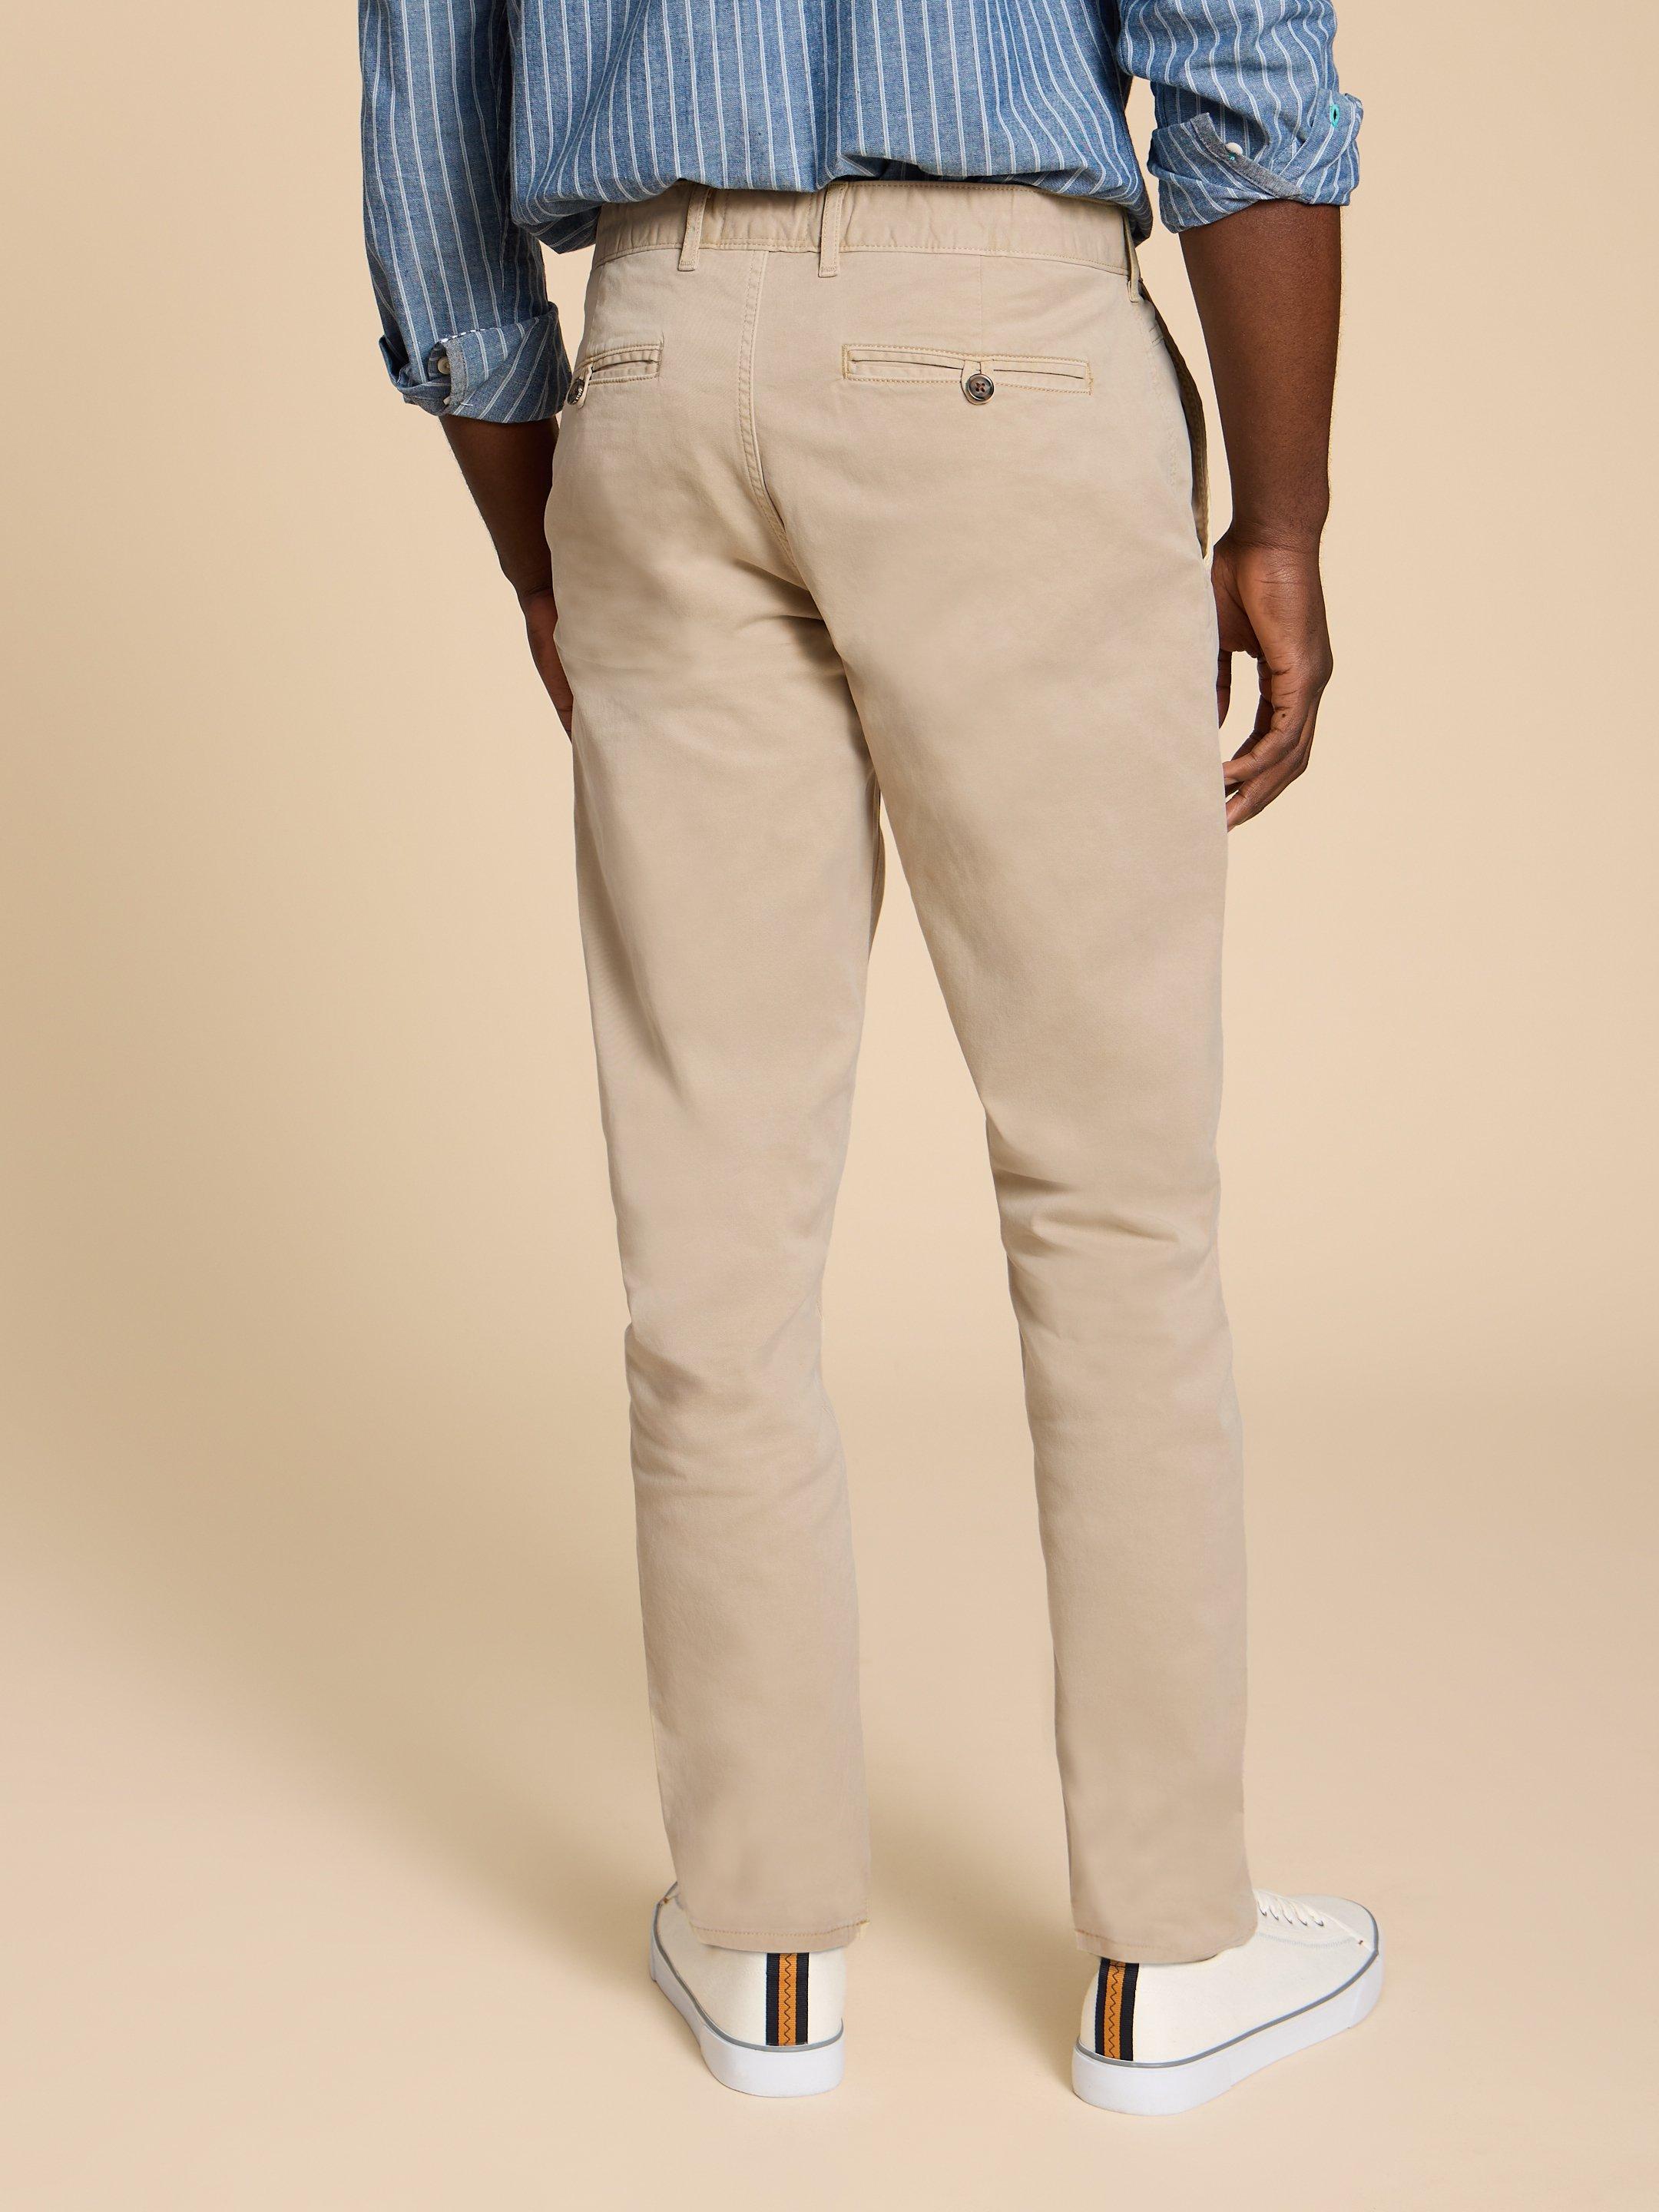 Sutton Organic Chino Trouser in LGT NAT - MODEL BACK